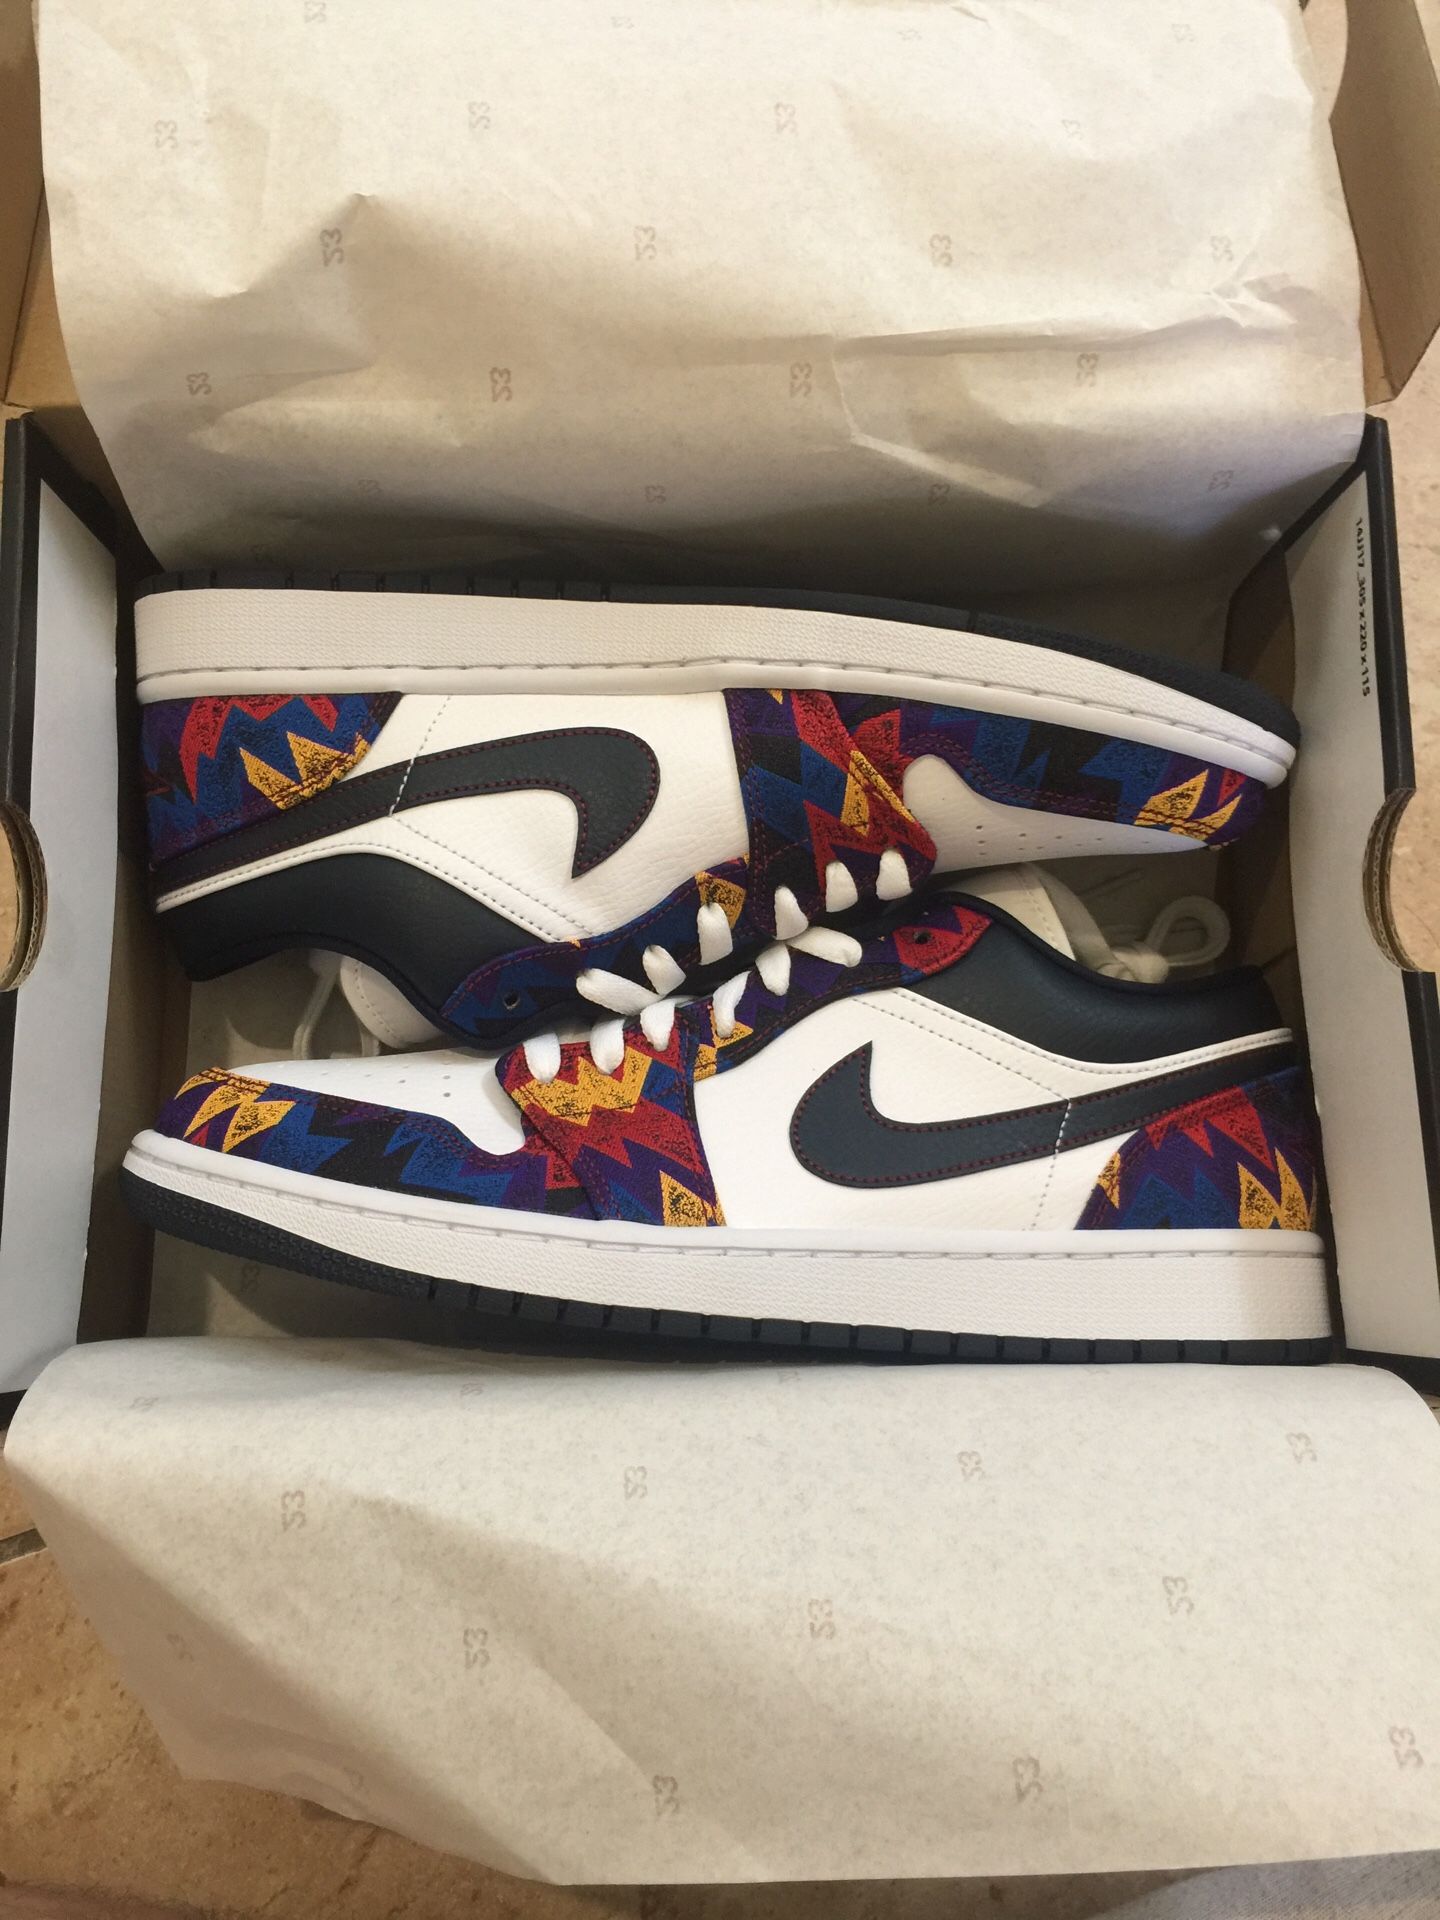 Jordan 1 low ‘Nothing But Net’ size 10.5 brand new in box